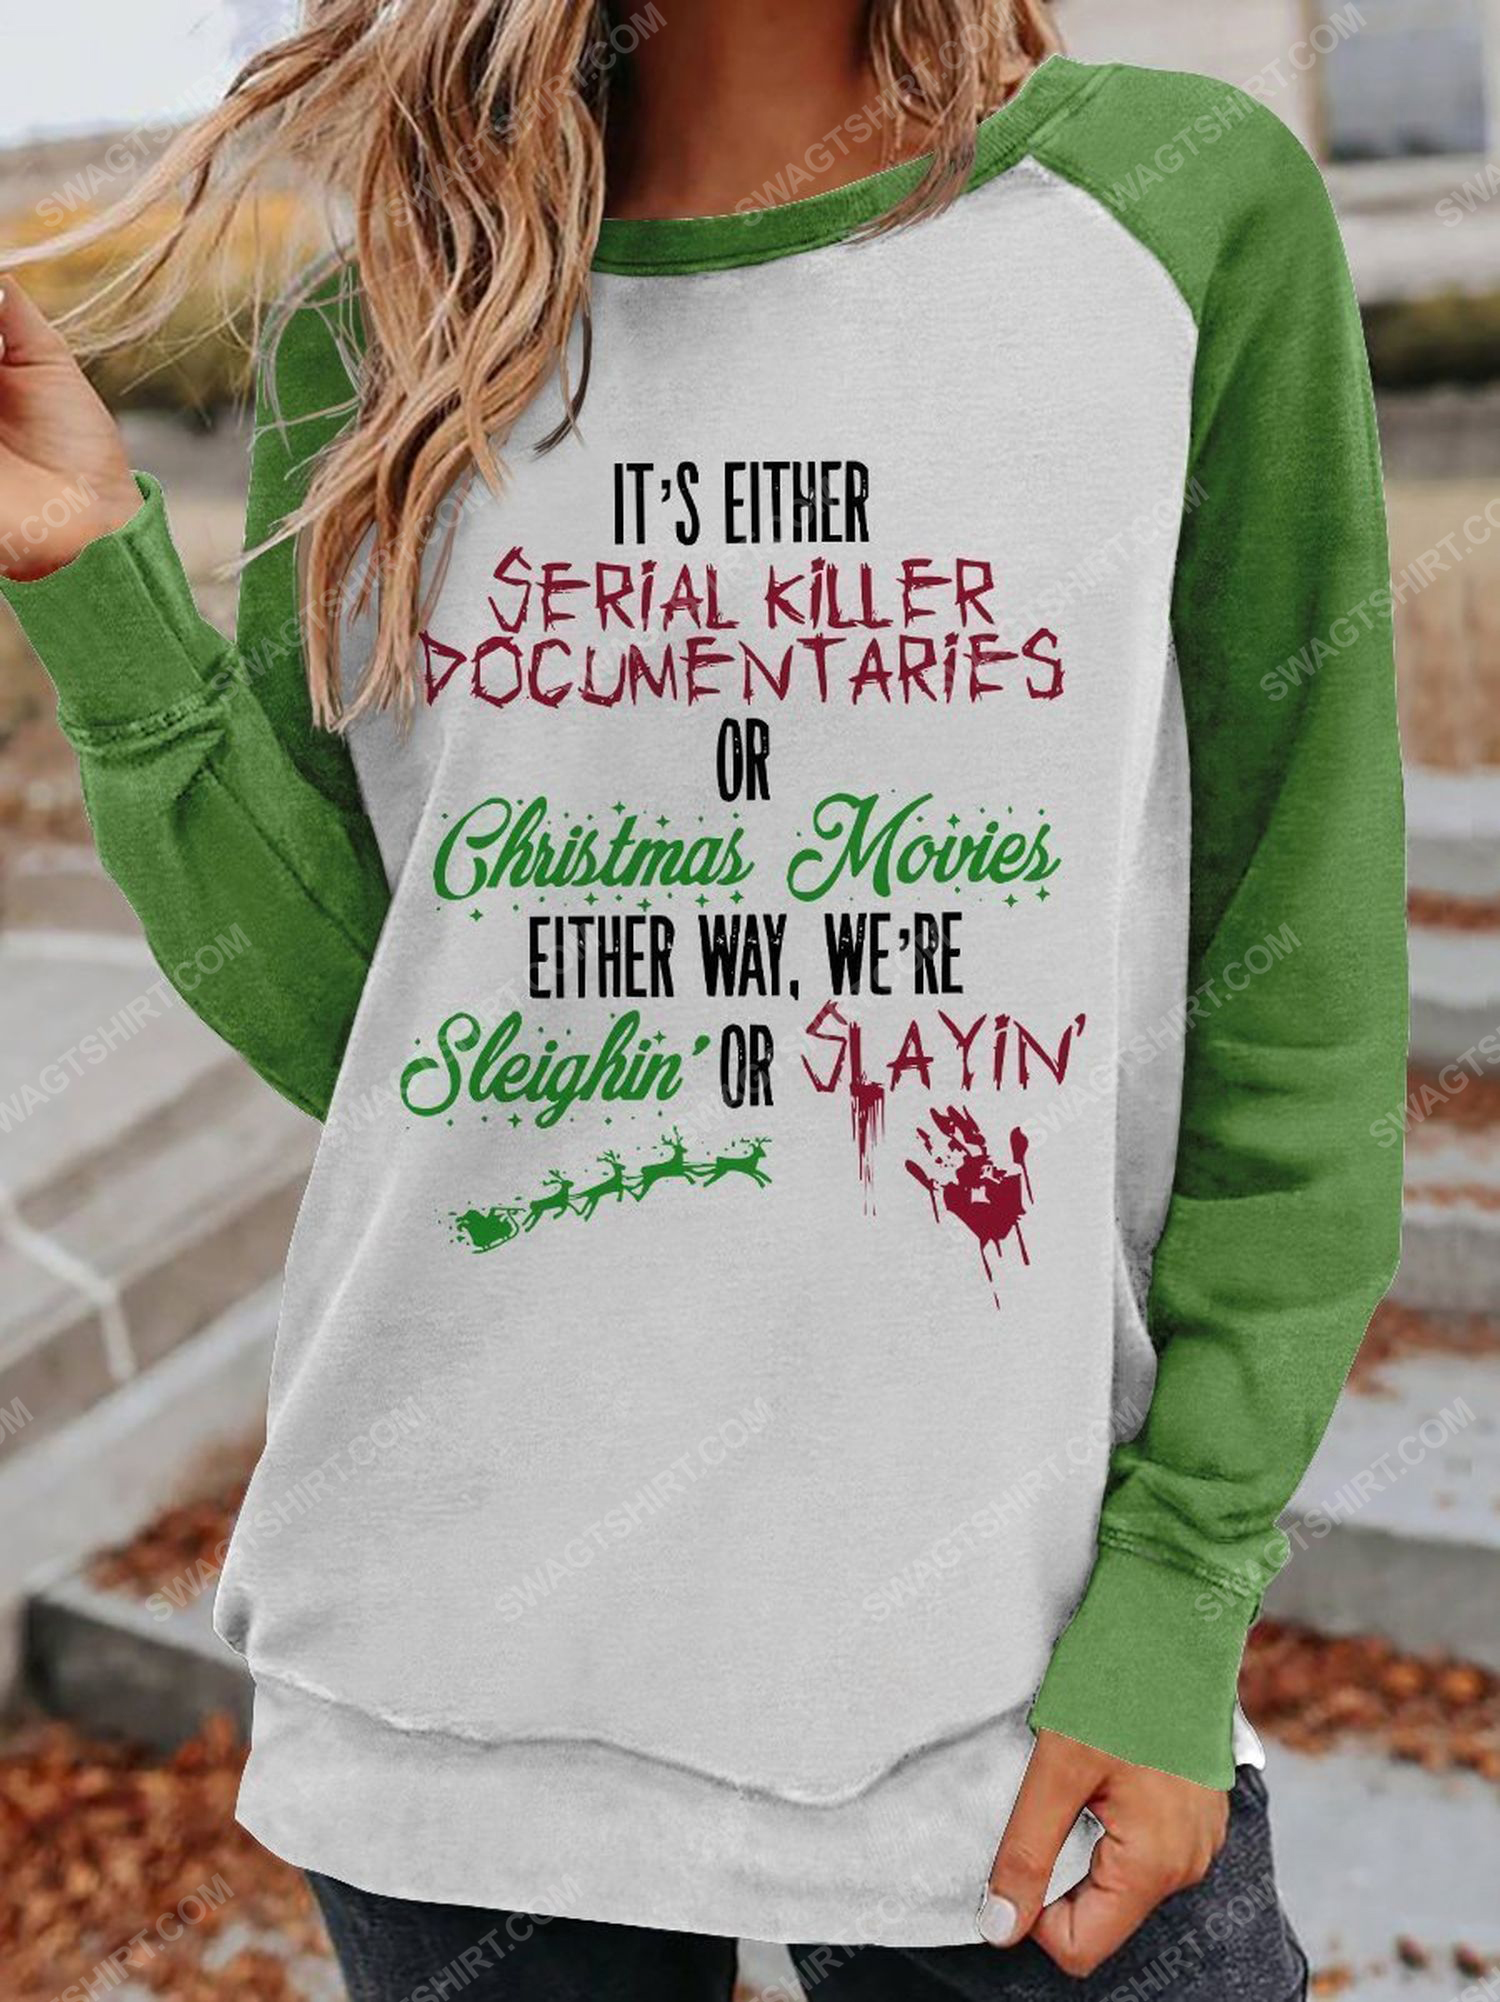 It’s either serial killer documentaries or christmas movies we either sleighin or slayin shirt 1